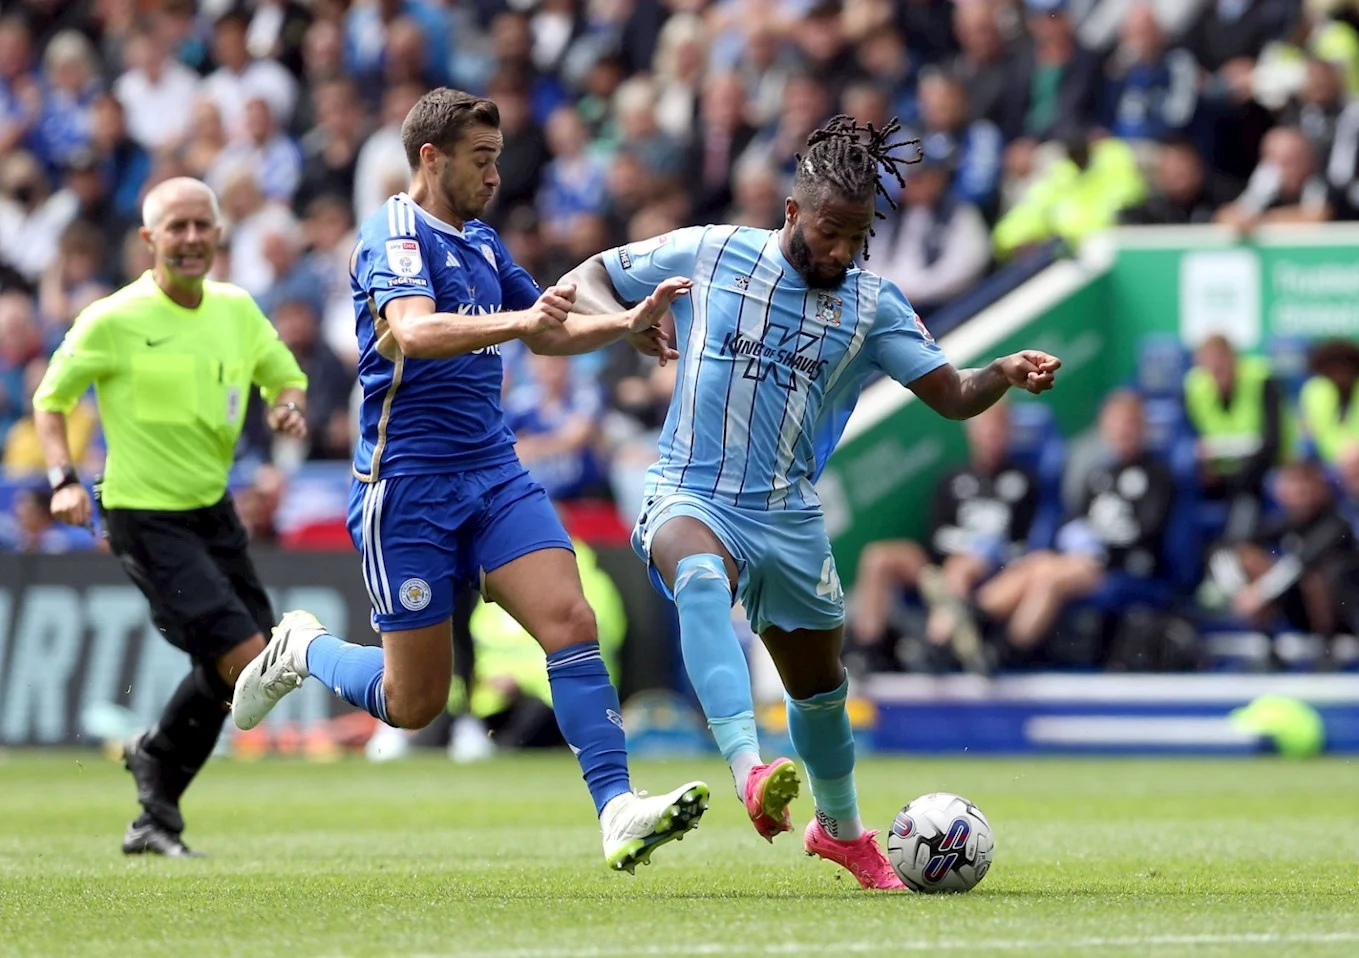 Coventry City Vs Leicester City Prediction, Preview, And Betting Tips | January 13, 2023